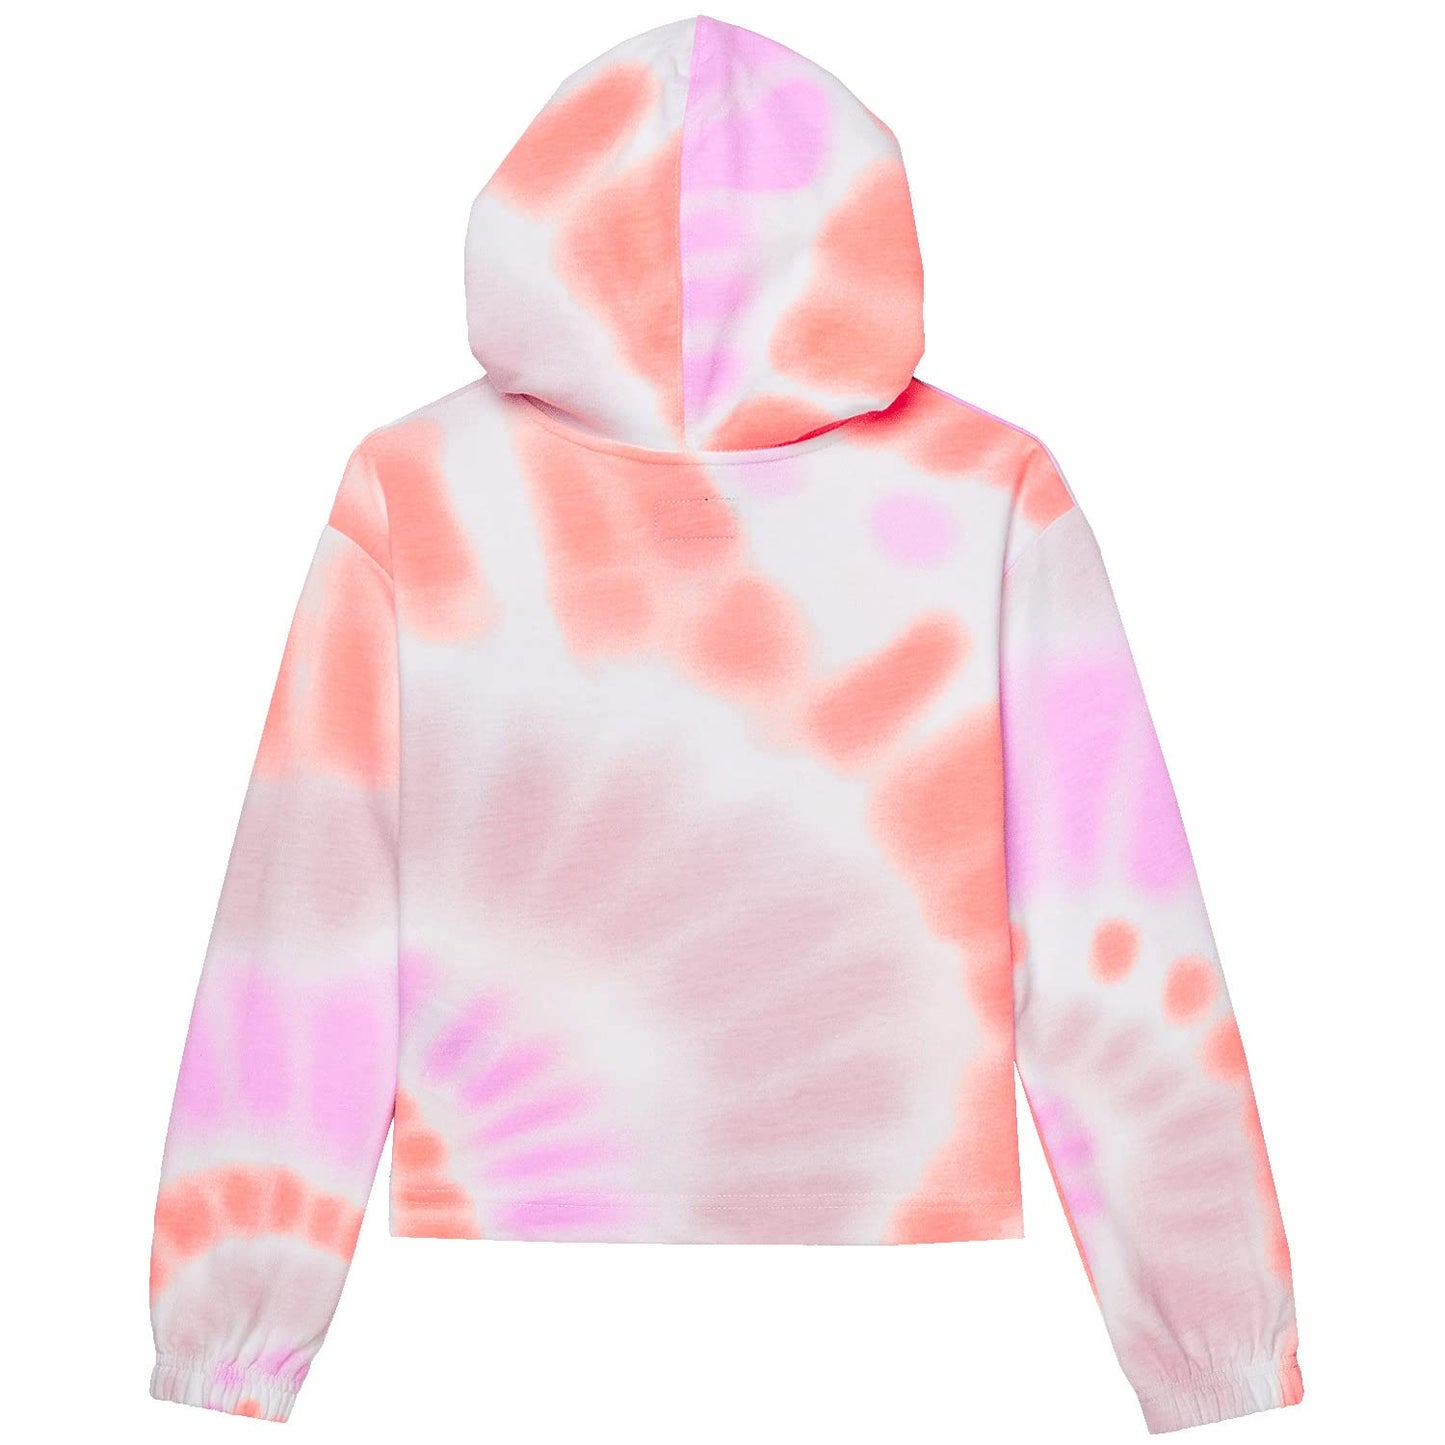 Image 2 of All Over Print Tie-Dye Boxy Hoodie (Toddler/Little Kids)